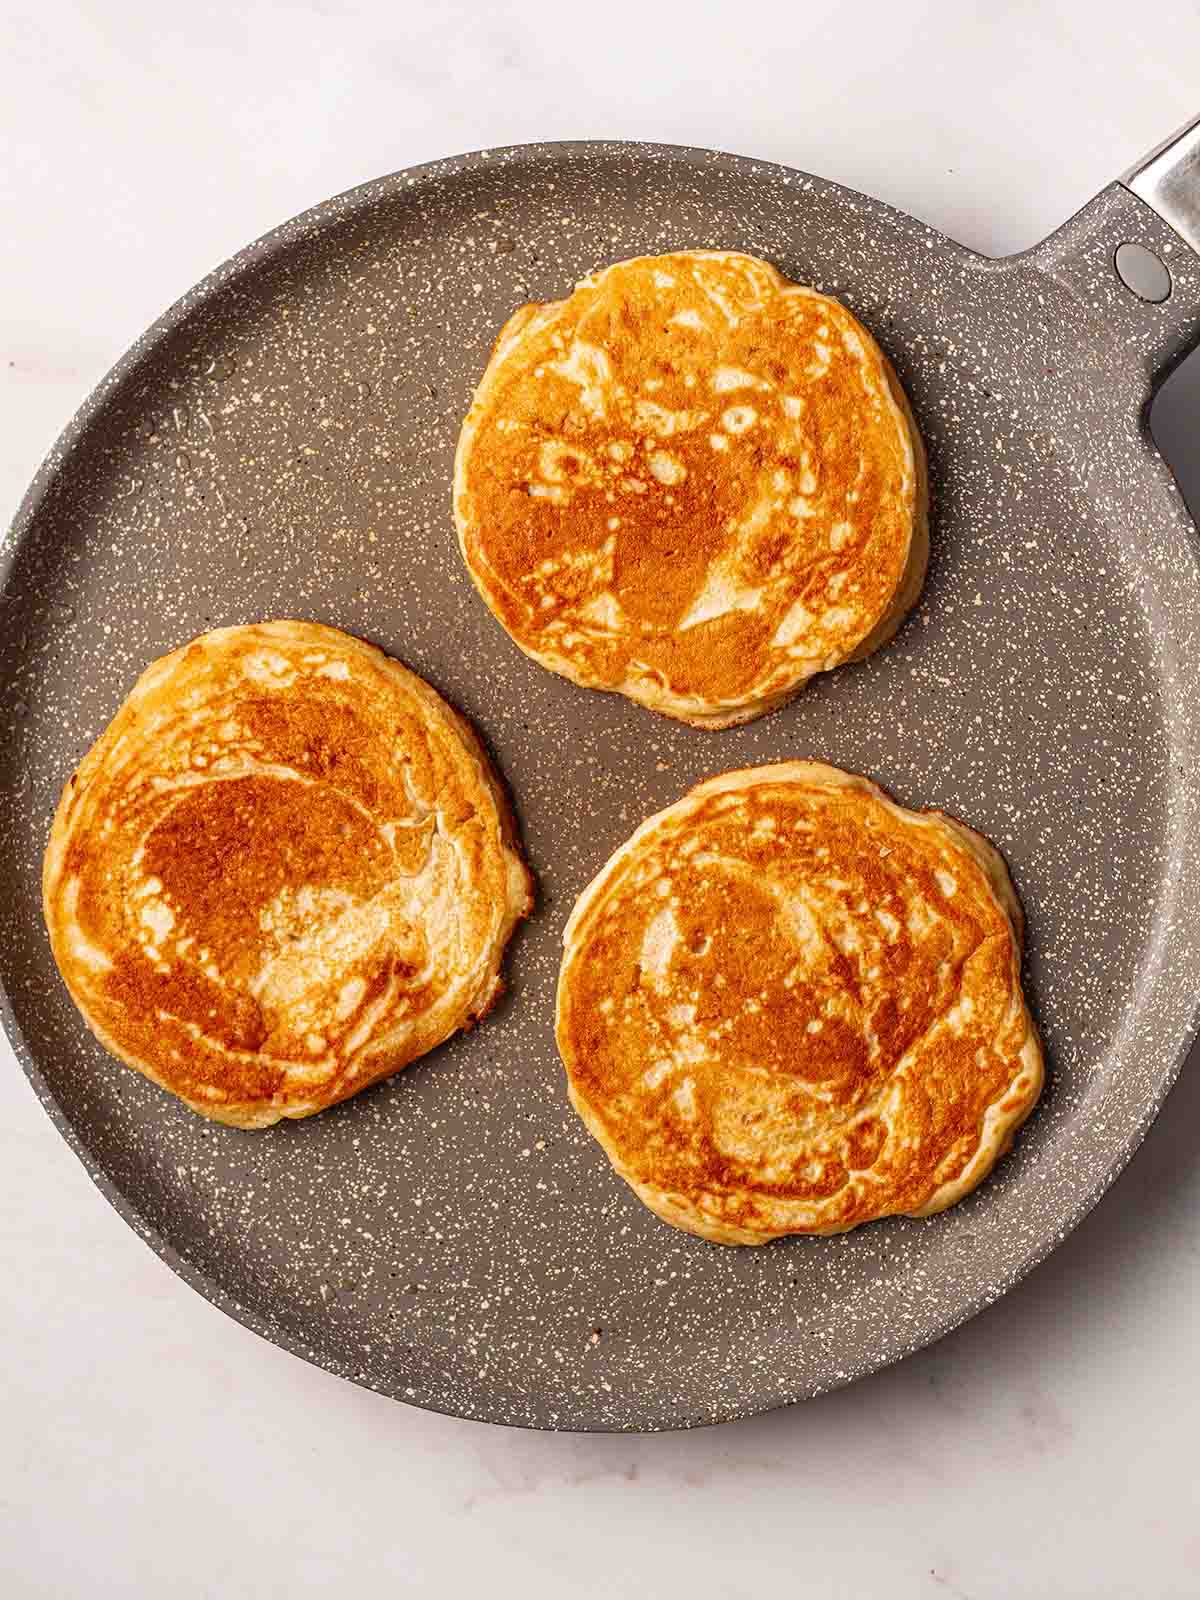 A frying pan with 3 round American Pancakes being cooked for step 4 in the recipe process.